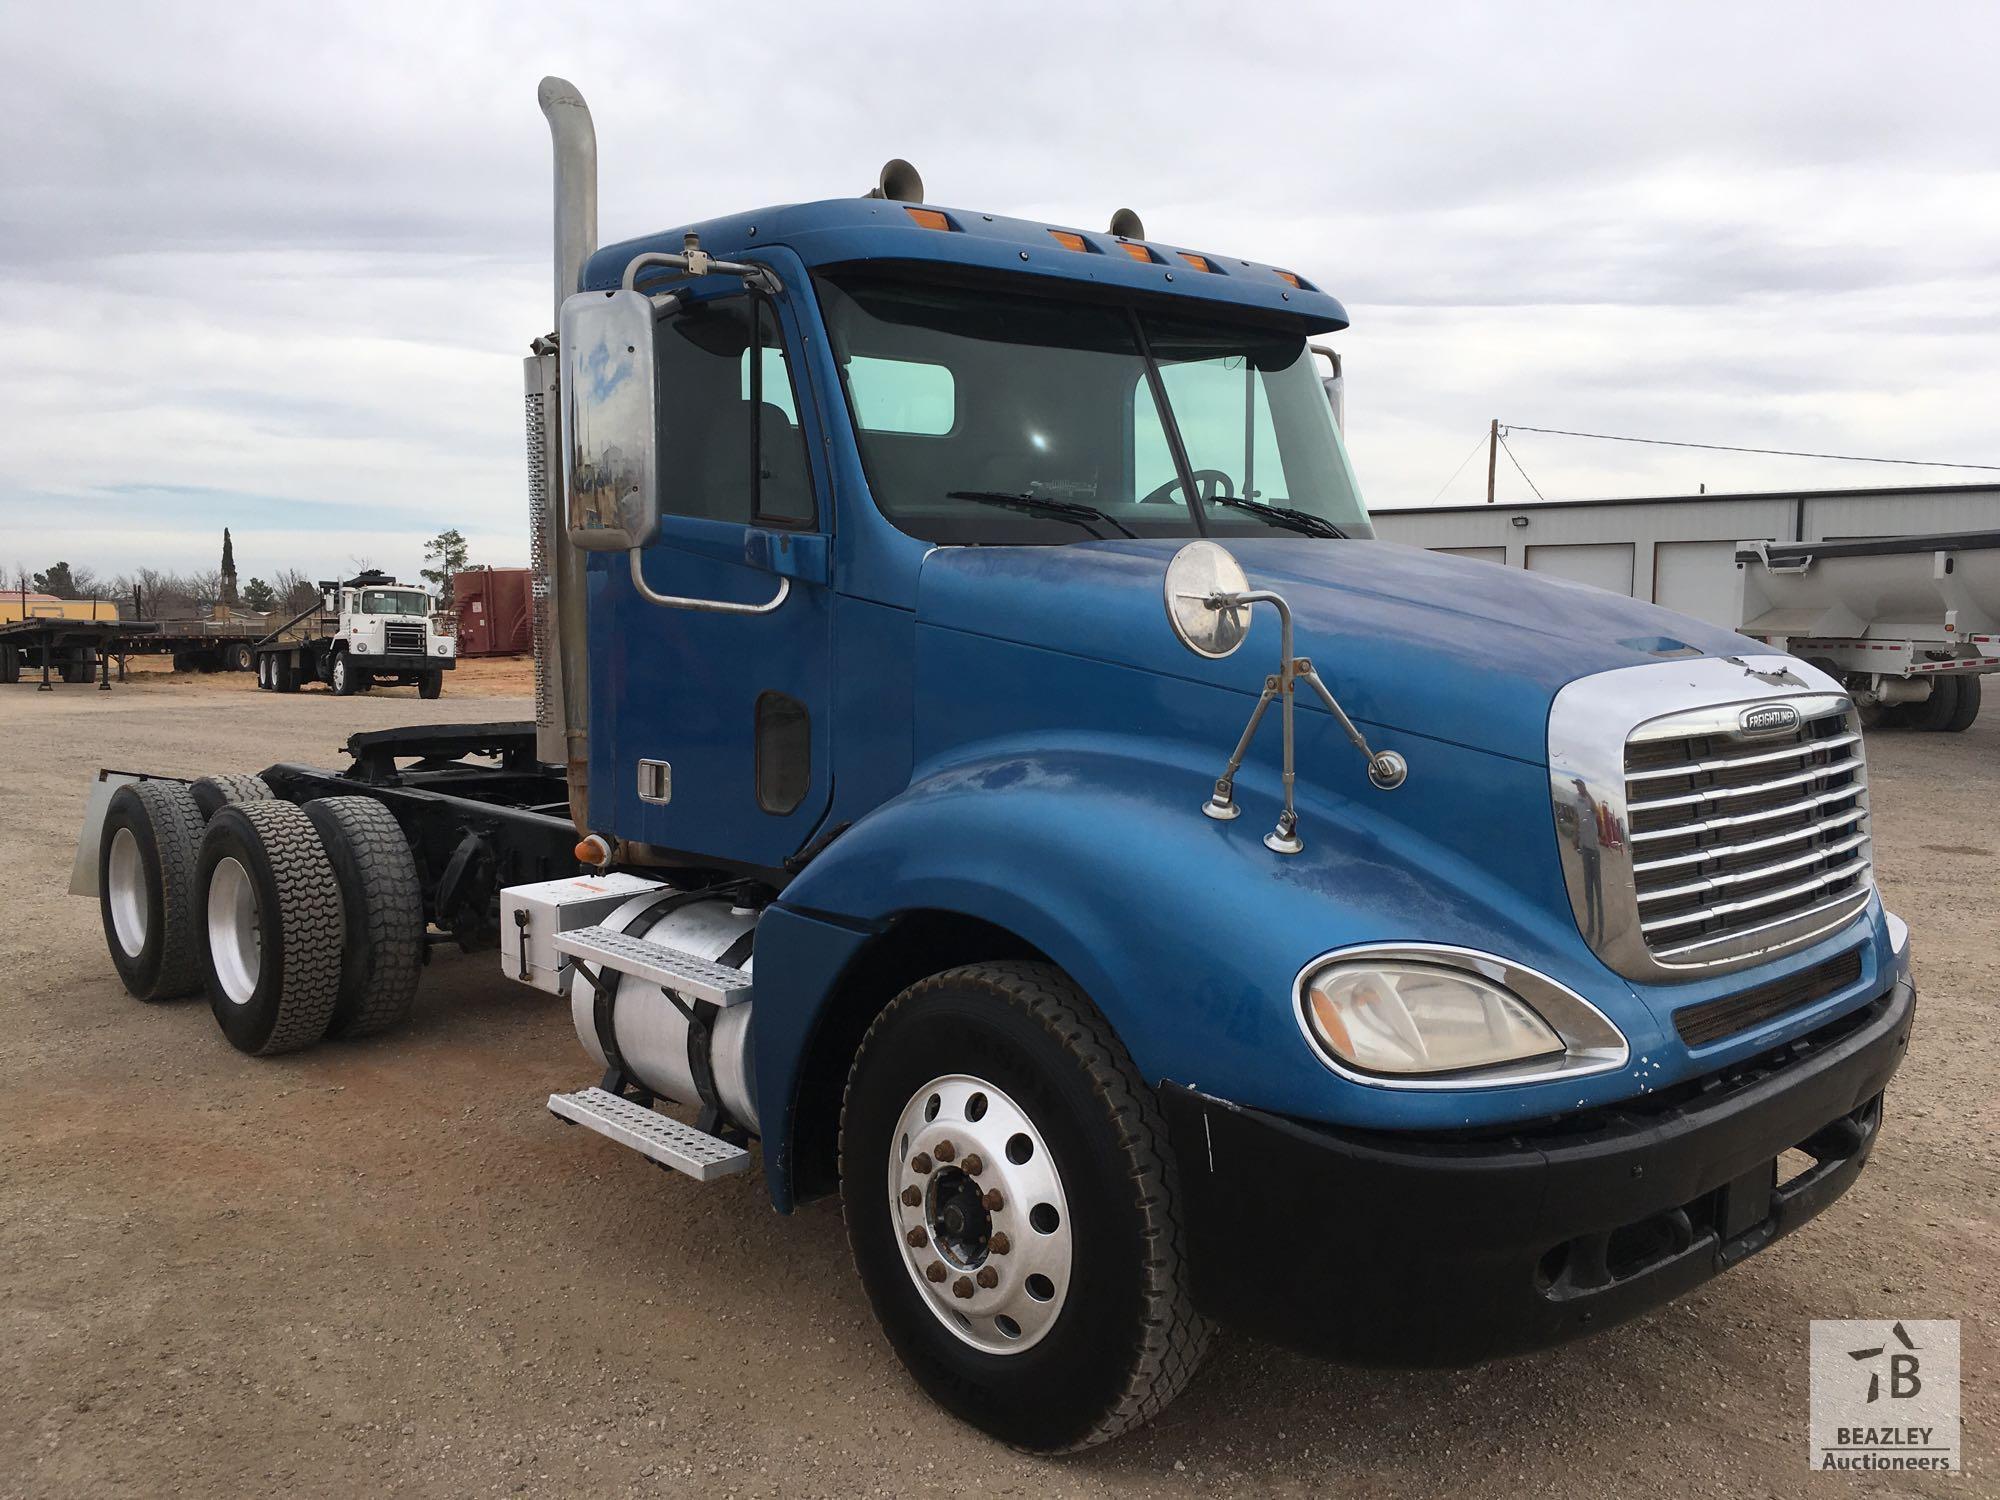 2006 Freightliner Columbia T/A Day Cab Truck Tractor [Yard 1: Odessa]